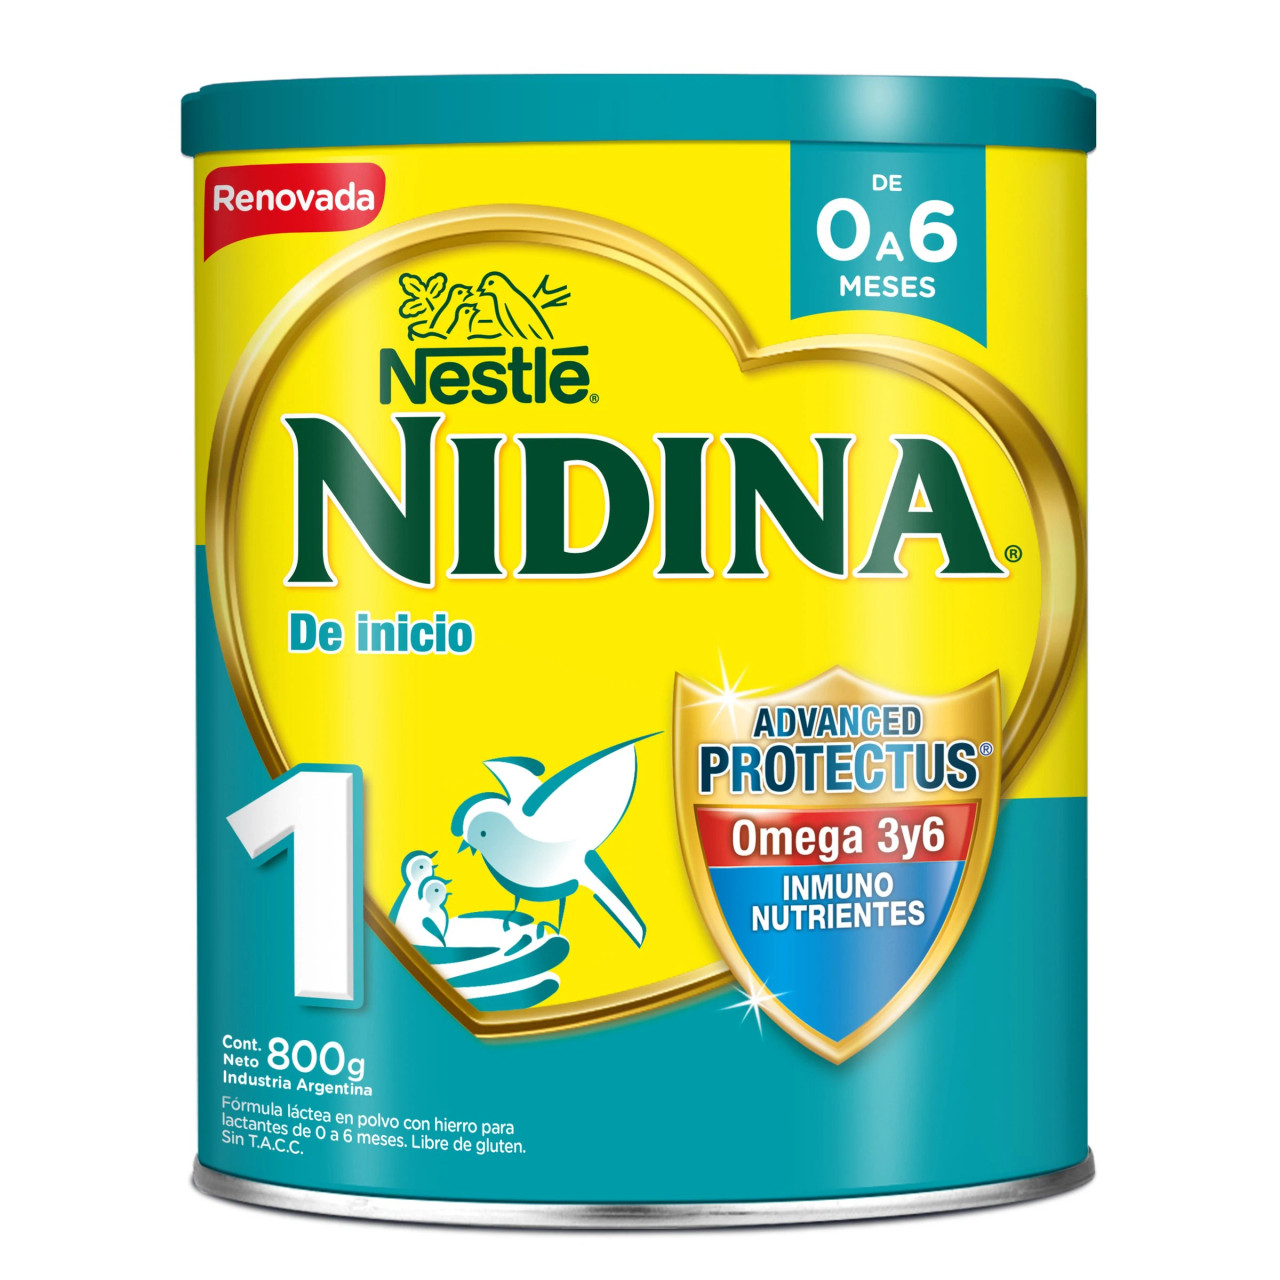 Nestlé Nidina Milk Powder Specially Formulated Fortified with Omega 3 and  6, Immune Nutrients Easy to Prepare - Birth to 6 Months, 800 g / 28.2 oz